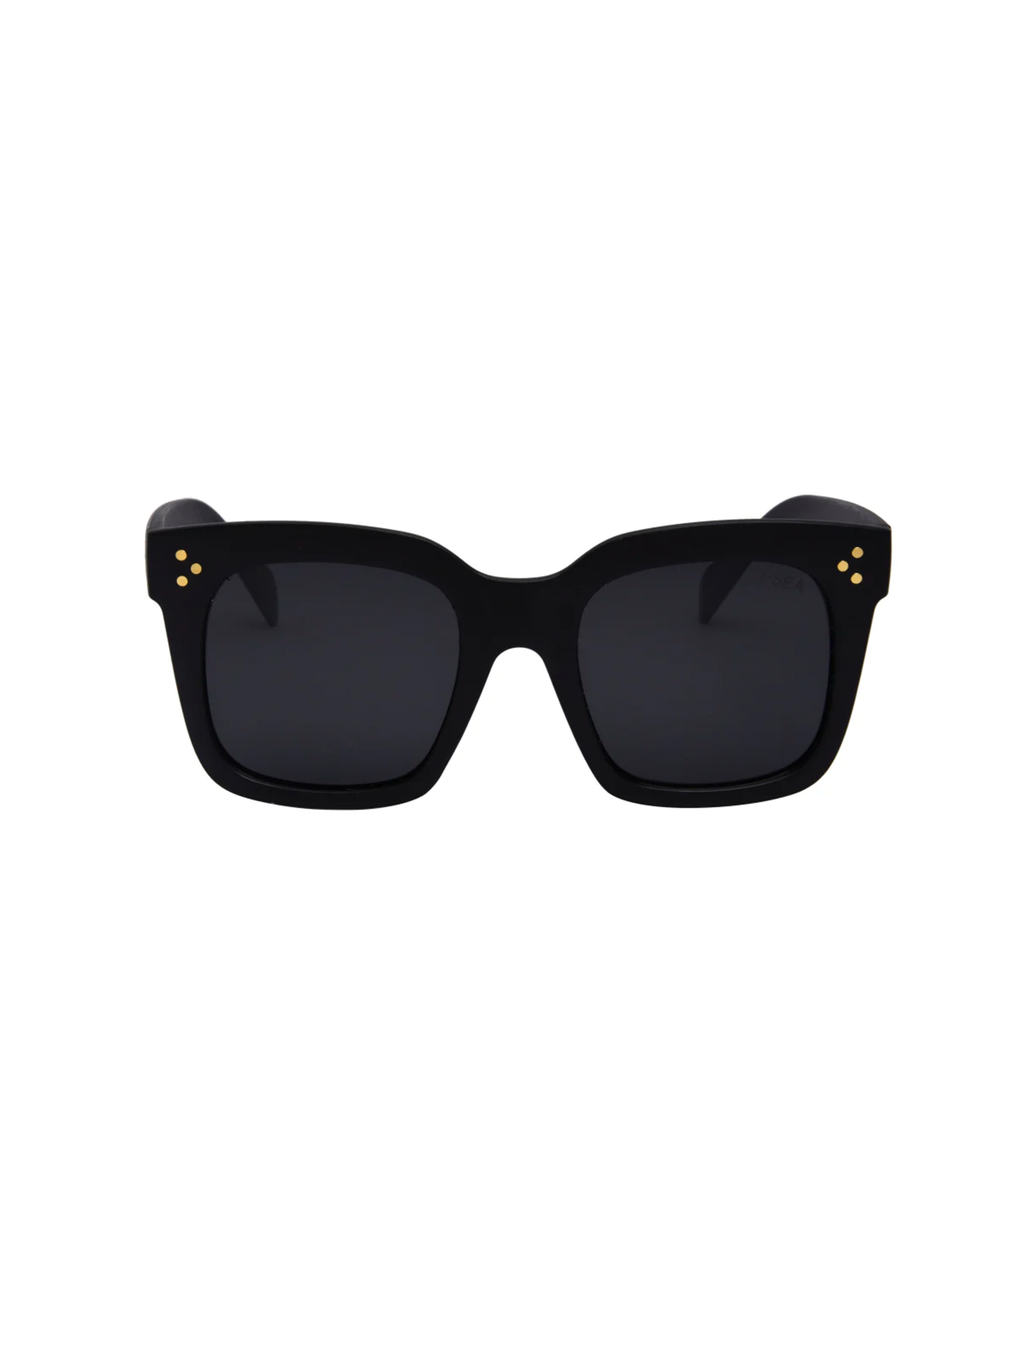 Waverly Sunnies in Matte Blk/Smk - Stitch And Feather